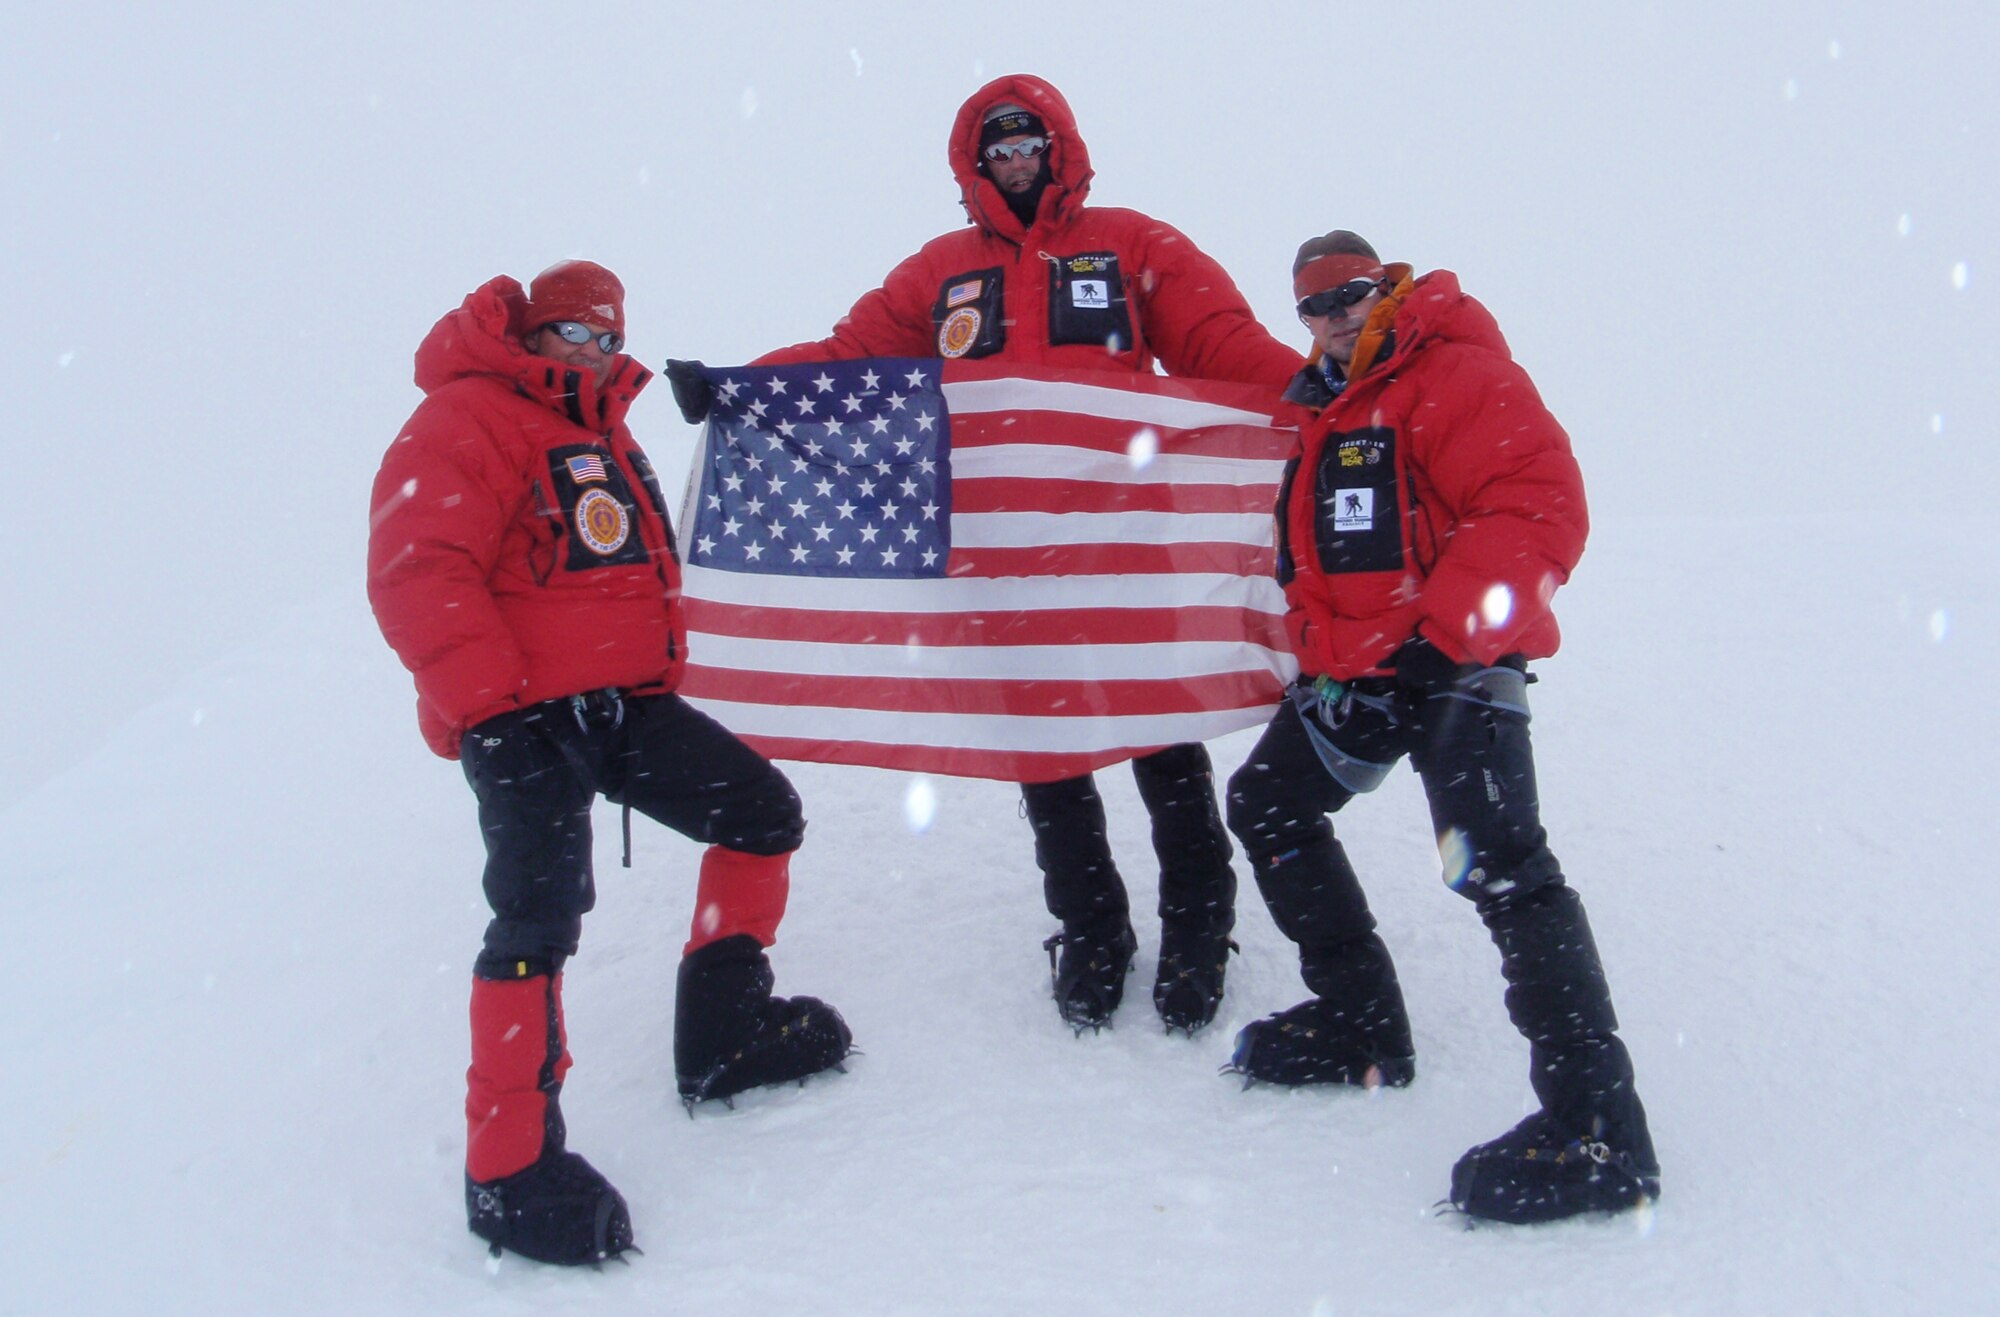 MOUNT MCKINLEY, Alaska -- Army Spc. Dave Shebib, Army Lt. Col. Marc Hoffmeister and climbing mentor Bob Haines hold the American flag at the summit of Mount McKinley June 16. Army Spc. Dave Shebib stands on Mount McKinley June 9. Mount McKinley is the highest peak in North America standing at more than 20,300 feet. (Courtesy photo)